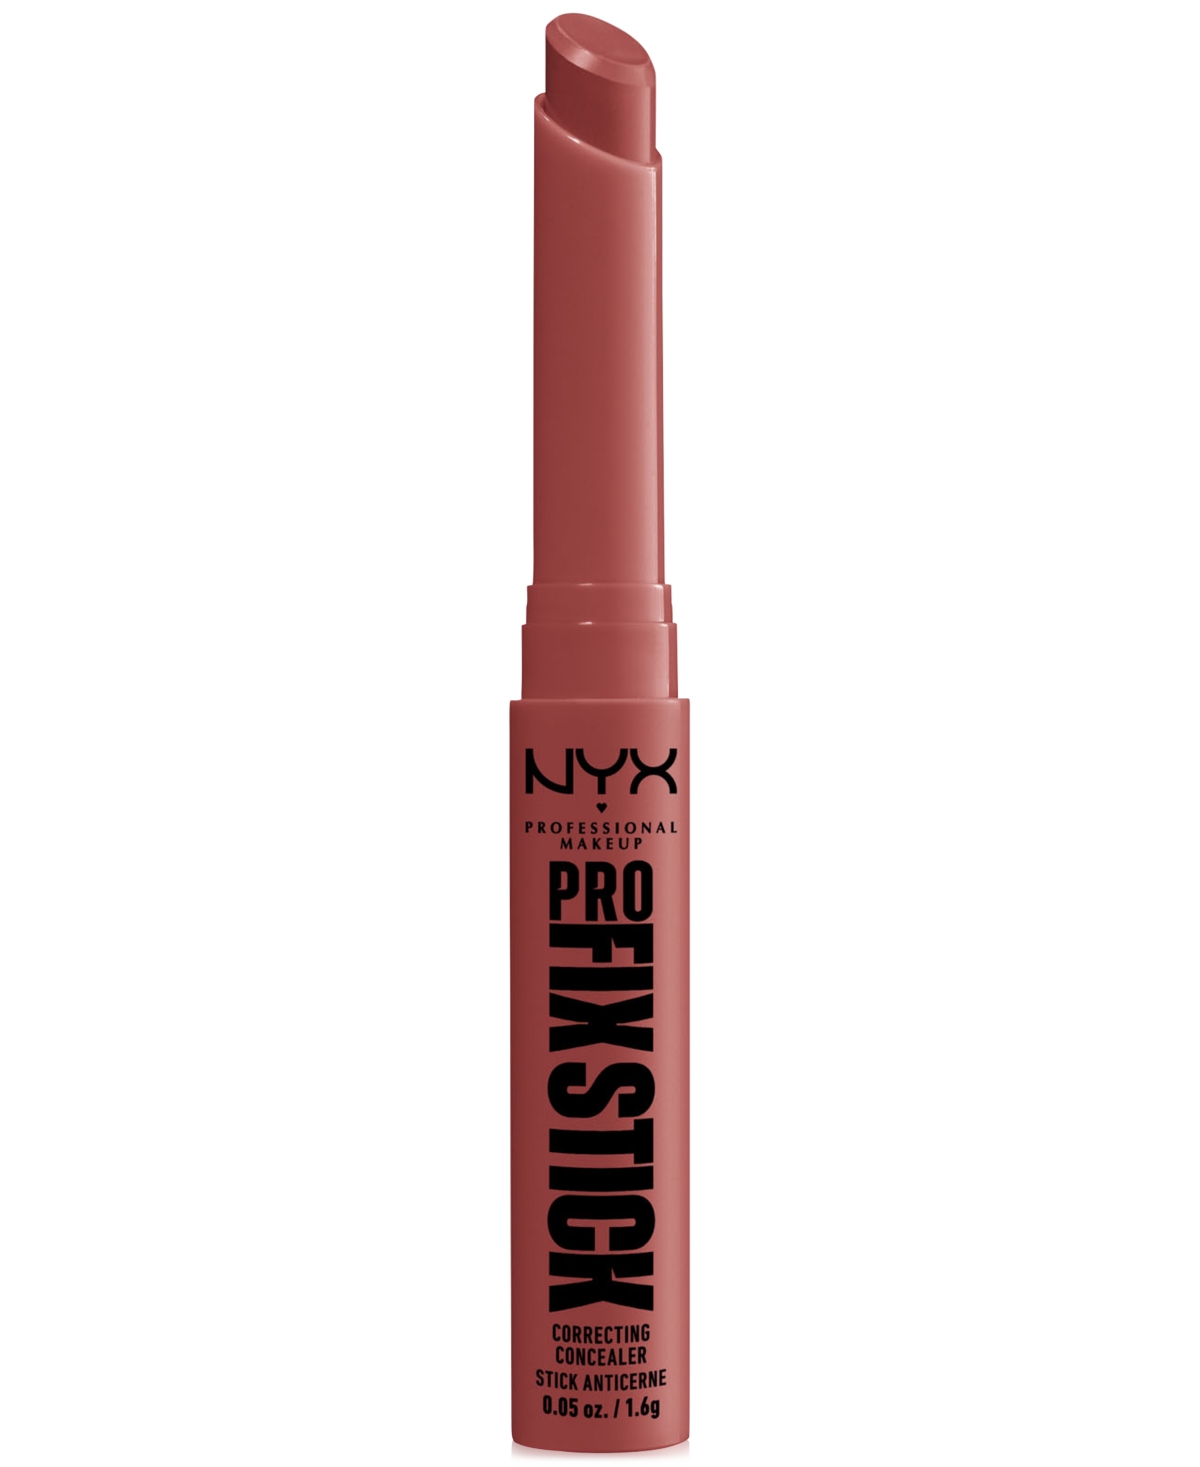 Nyx Professional Makeup Pro Fix Stick Correcting Concealer, 0.05 Oz. In Brick Red